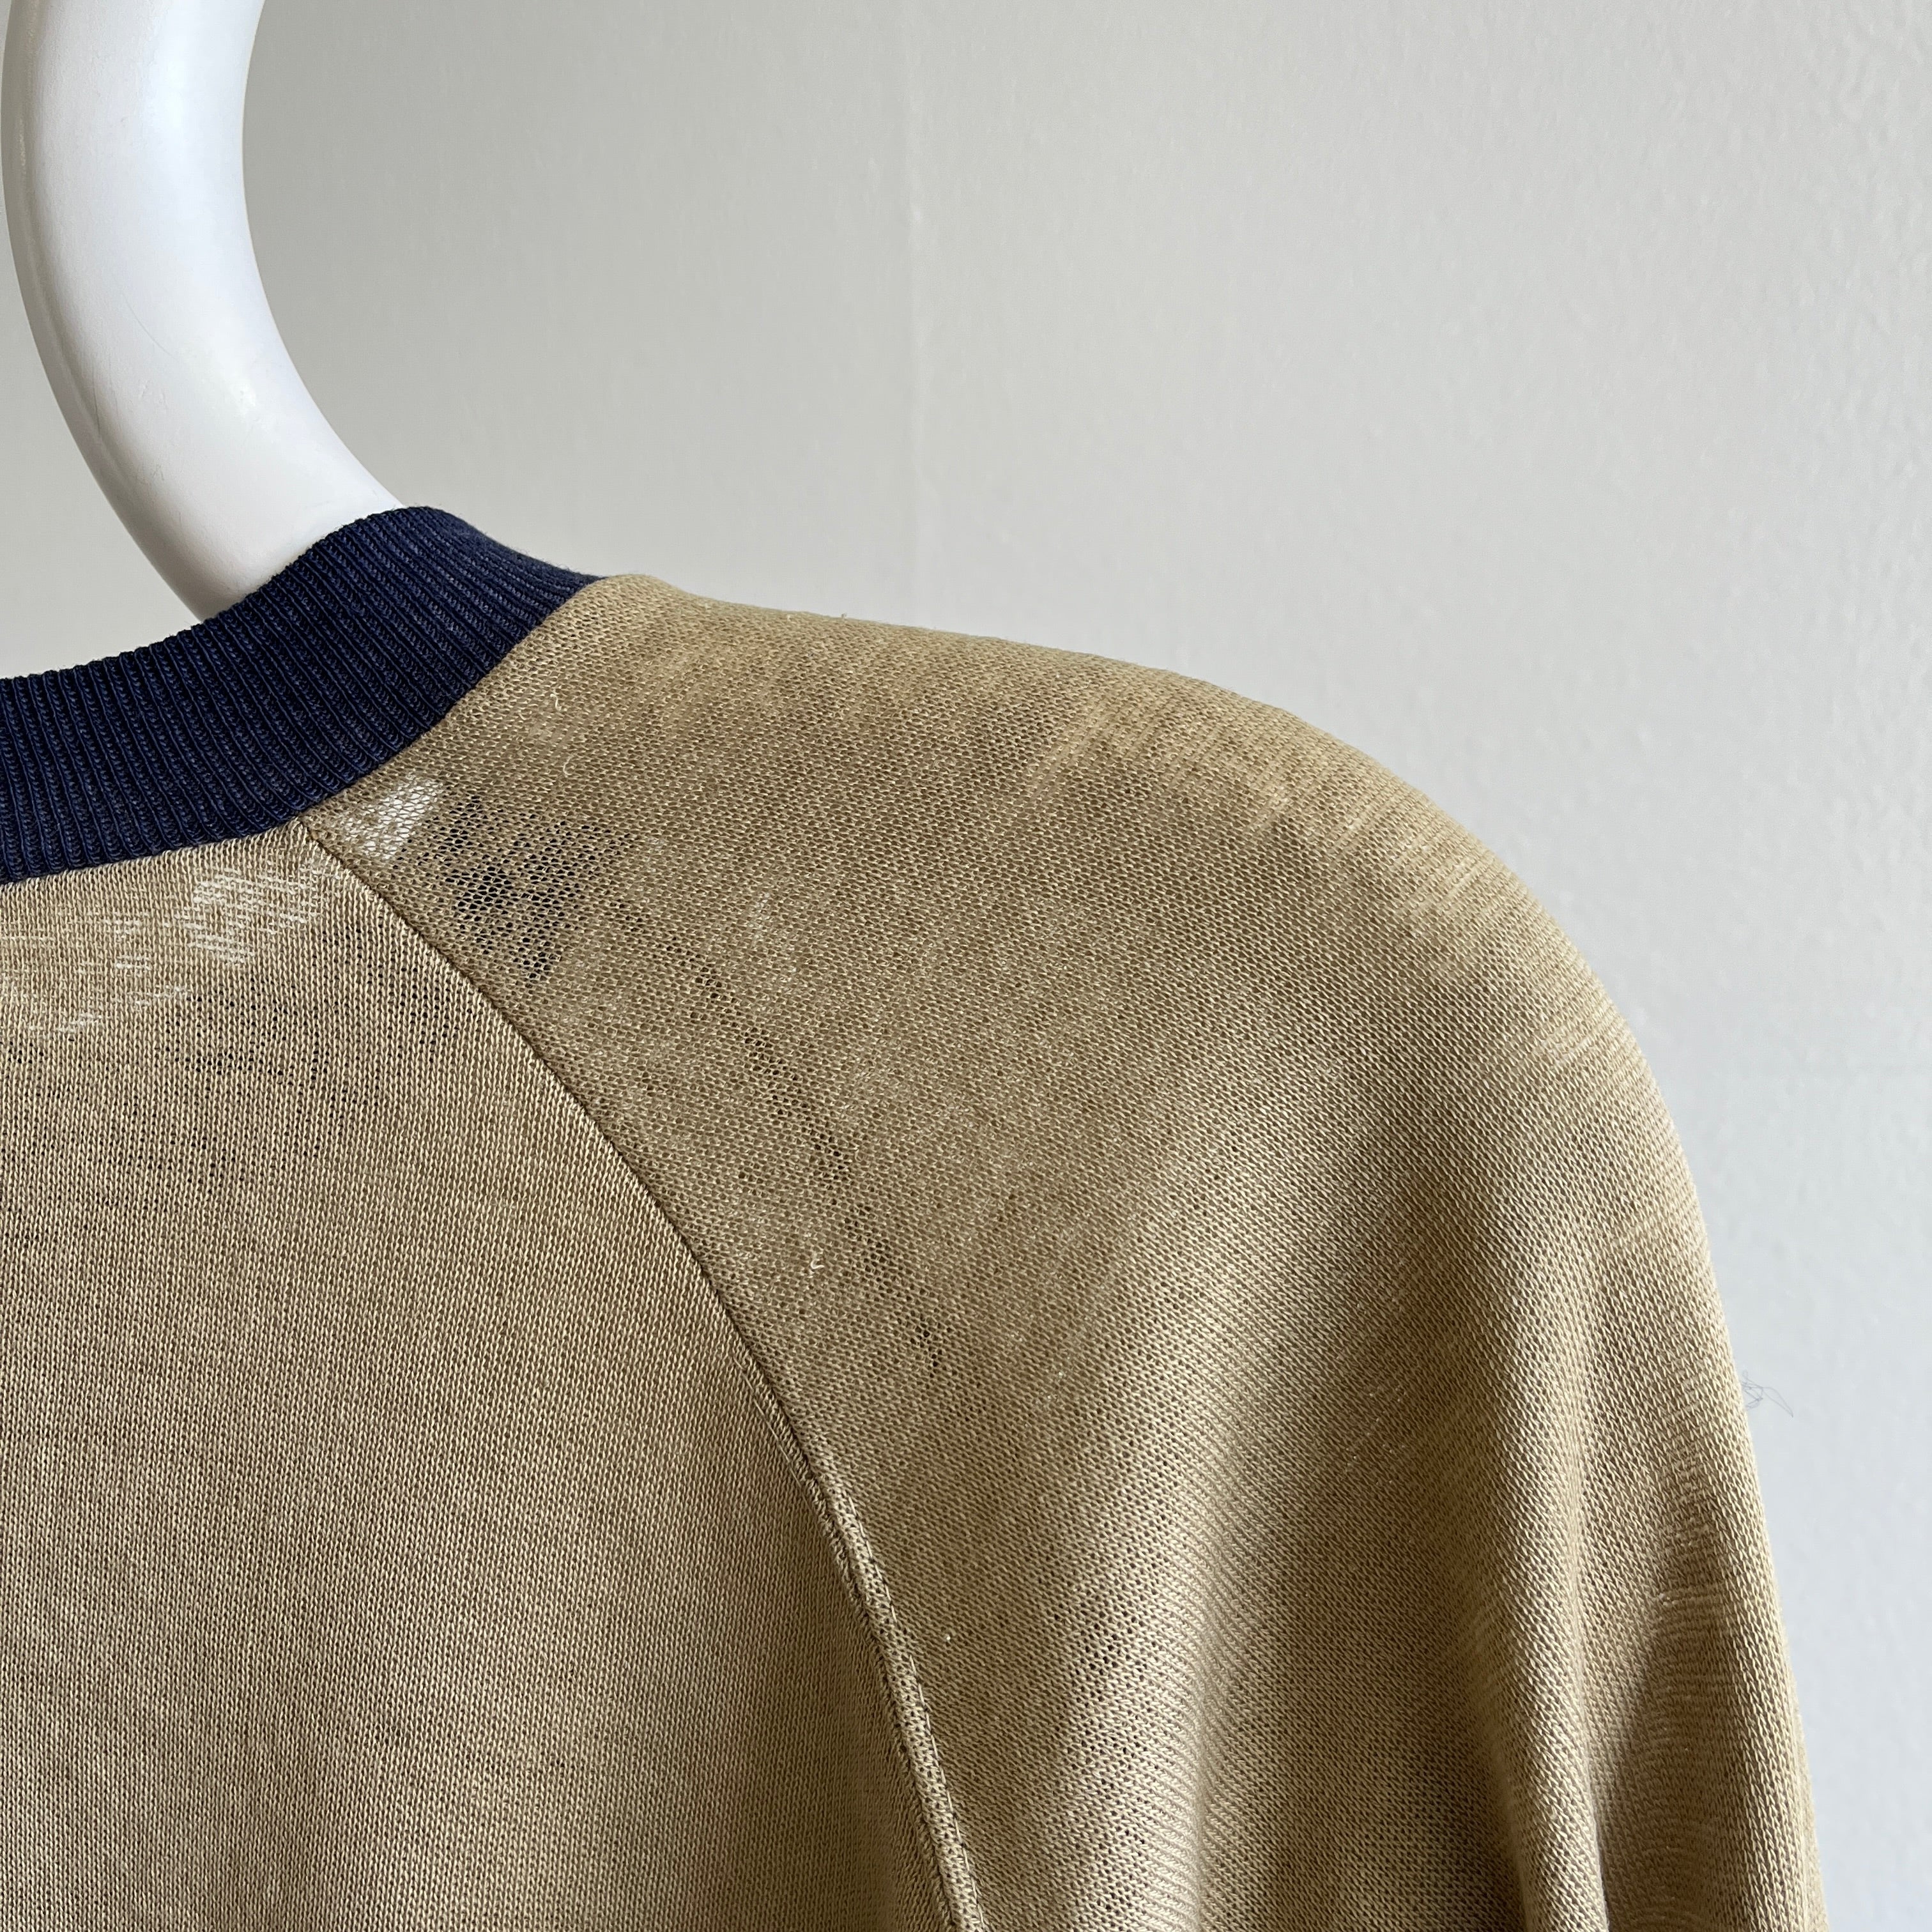 1980s Thinned Out Ultra Slouchy Two Tone Sweatshirt - Personal Collection Piece